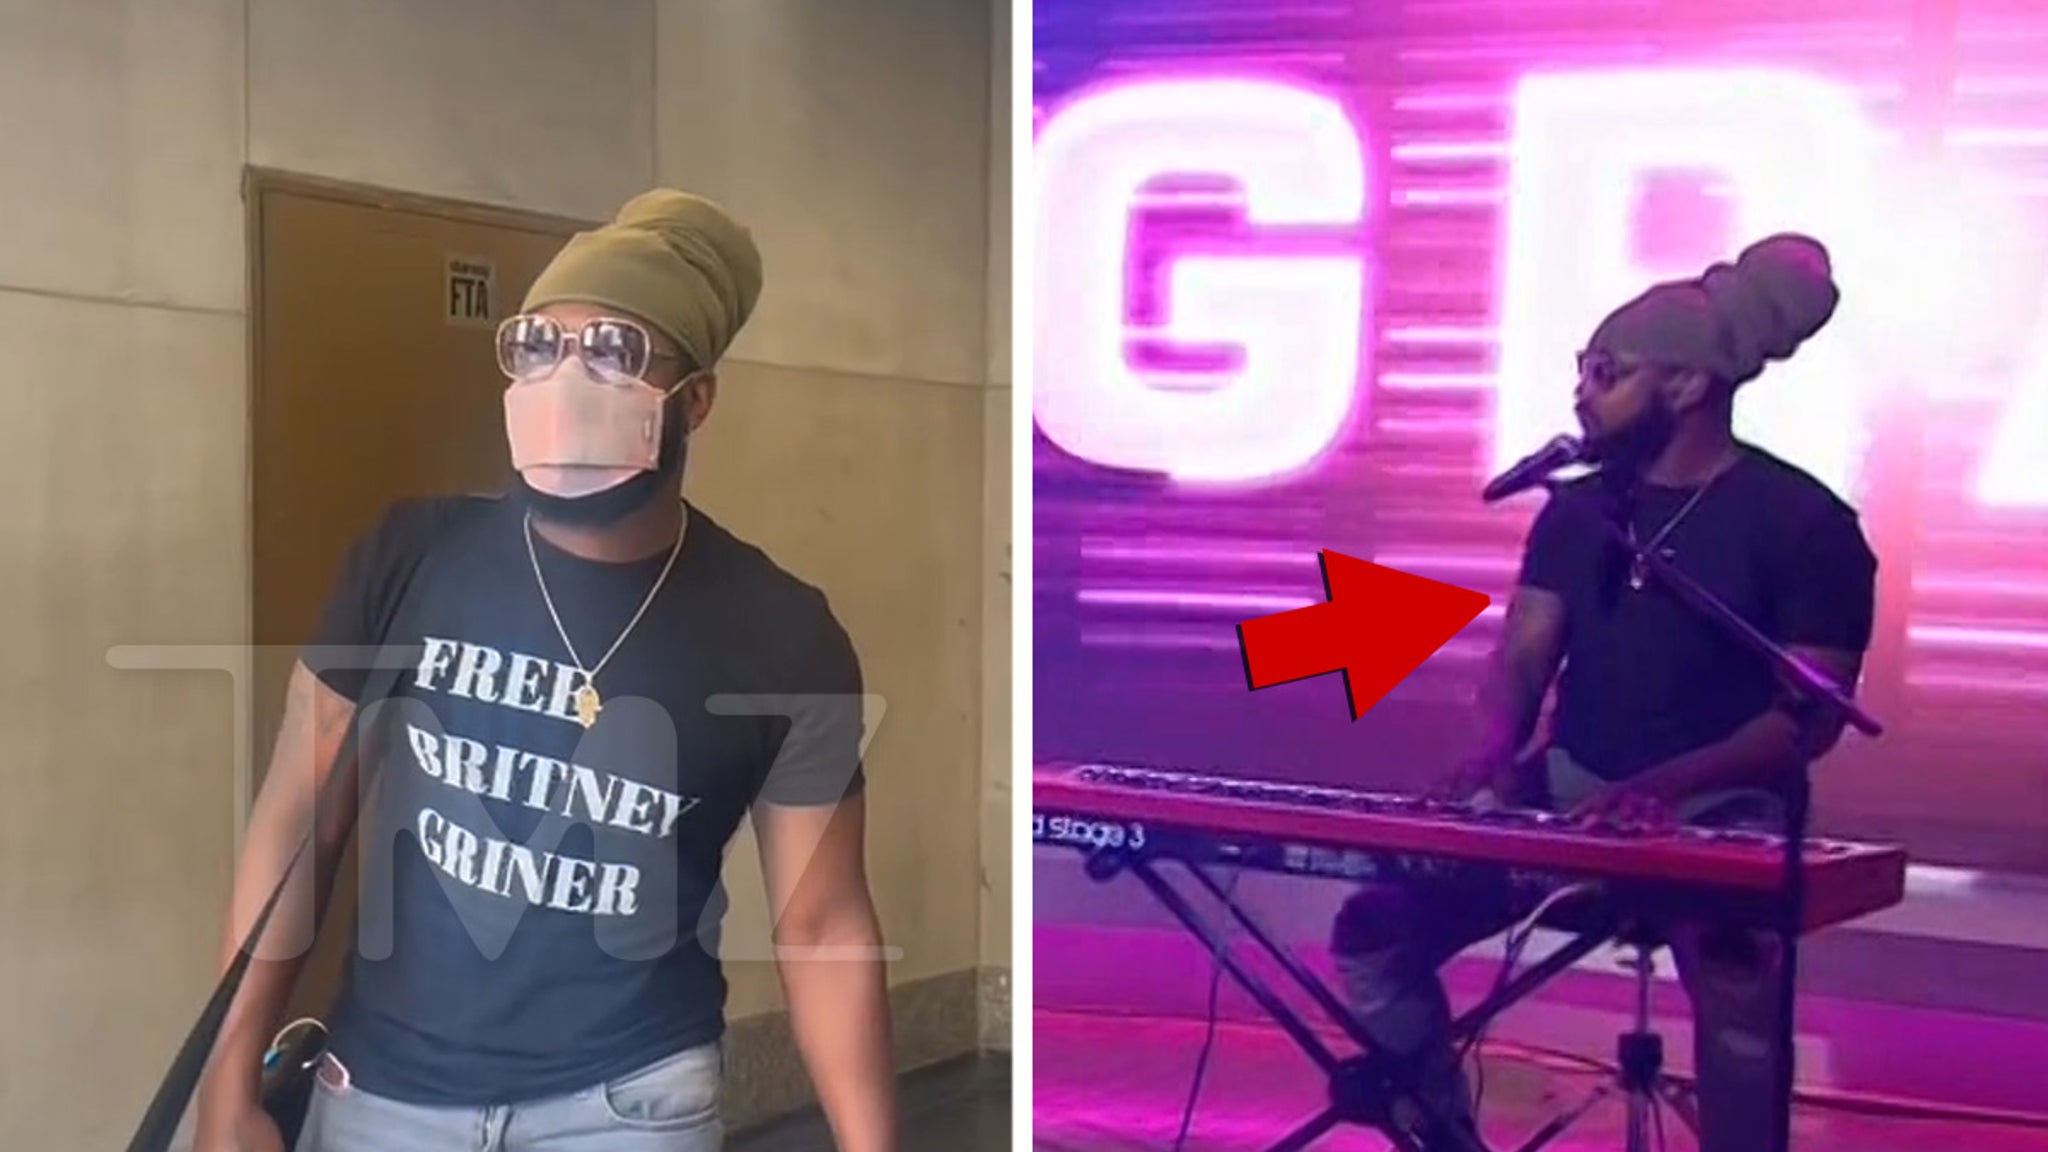 Macy Gray Says 'Today' Wouldn't Let Keyboardist Wear 'Free Brittney Griner' Shirt thumbnail